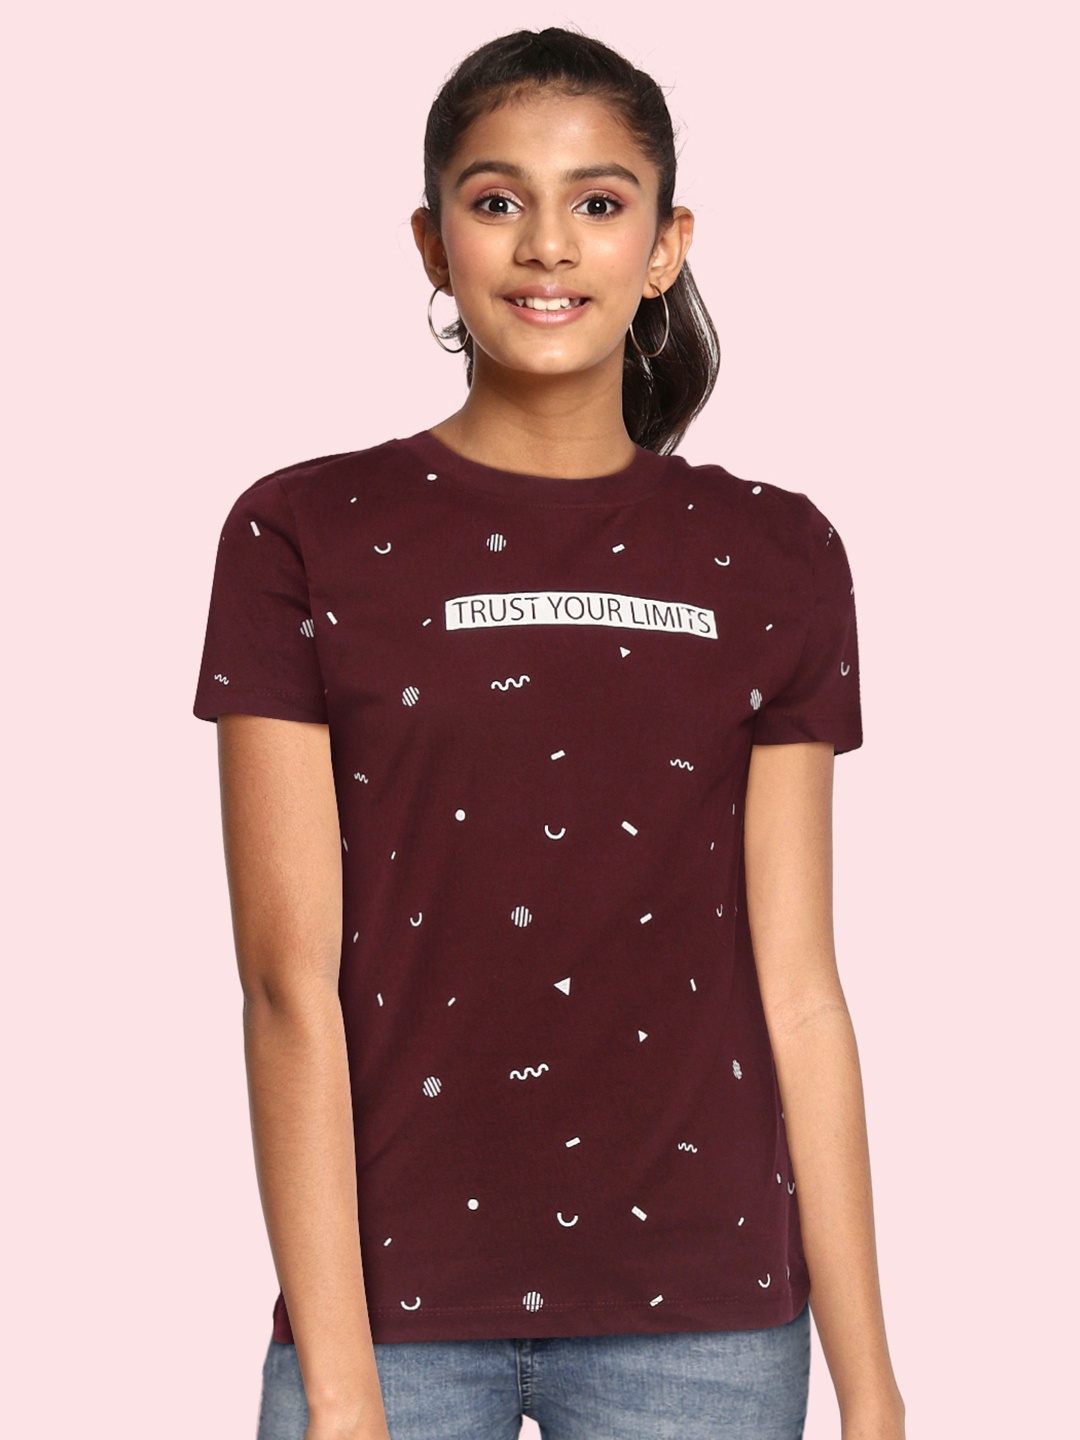 

UTH by Roadster Girls Burgundy & White Cotton Printed T-shirt